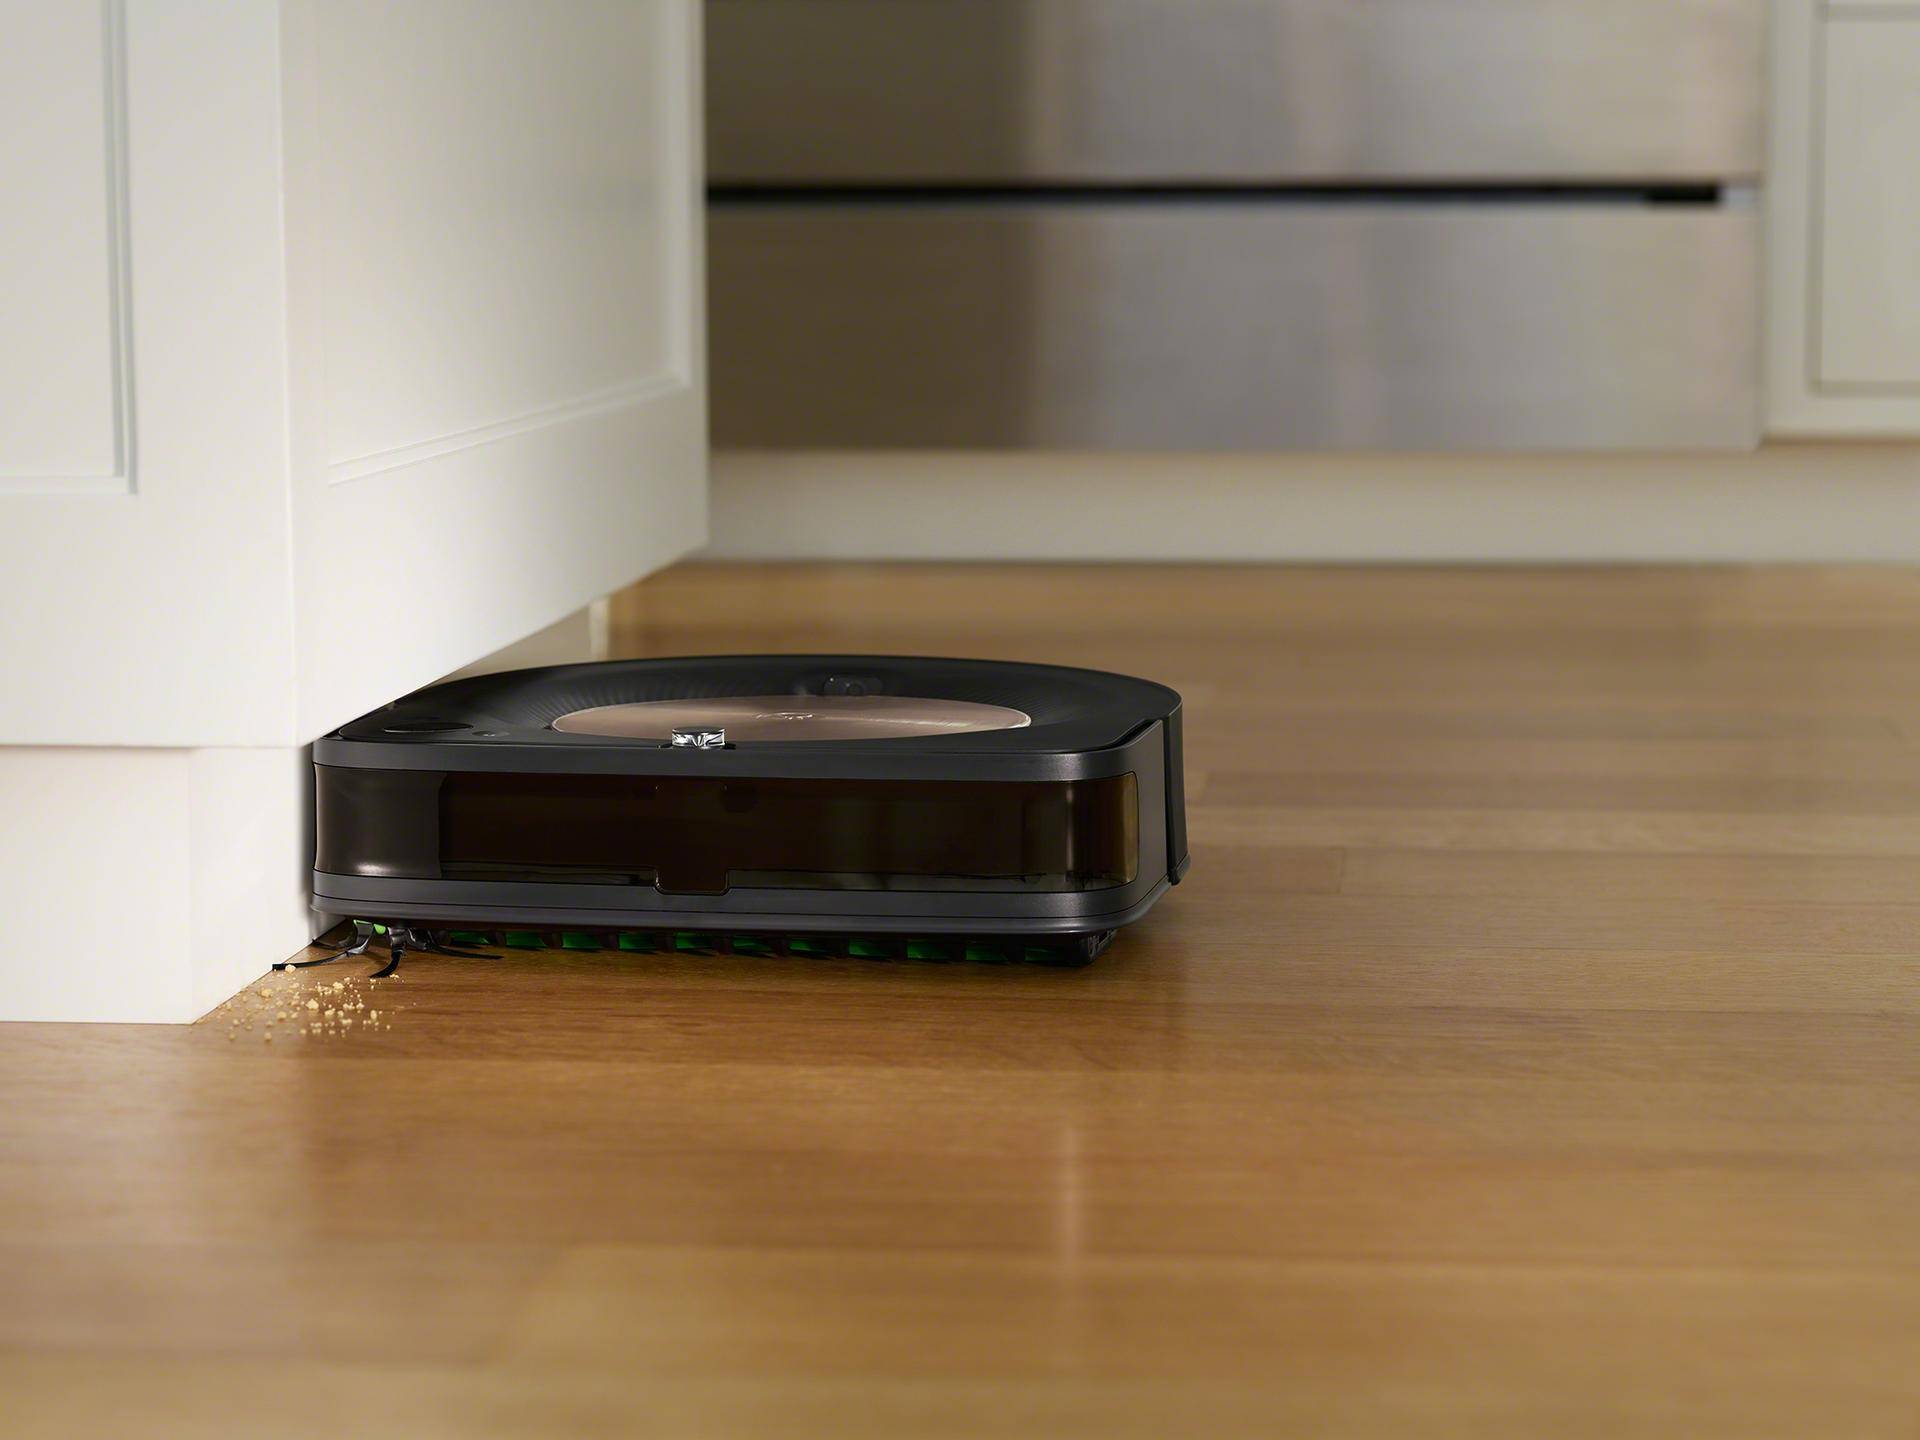 Interview | Interview with iRobot CEO: In 5-8 years, home robots will